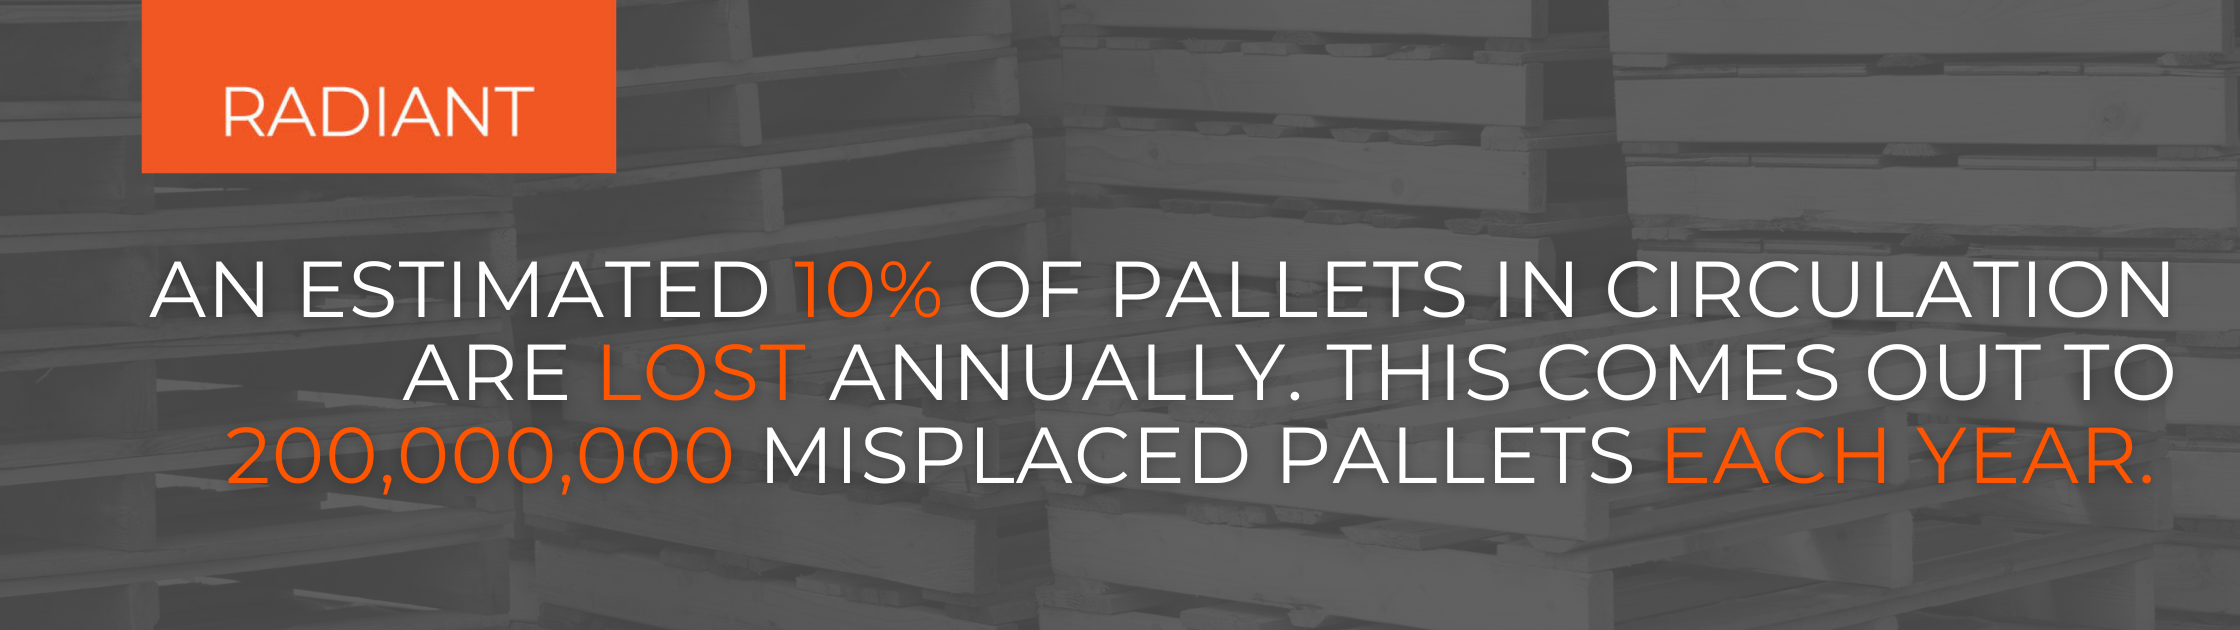 How Many Pallets Are Lost Each Year - Why Is There A Pallet Shortage - Pallet Shortage - National Pallet Shortage - Pallet Shortage 2022 - Pallet Tracking - Pallet Tracking Solution - Pallet Tracking System - Pallets Lost Annually - Displaced Pallets Annually